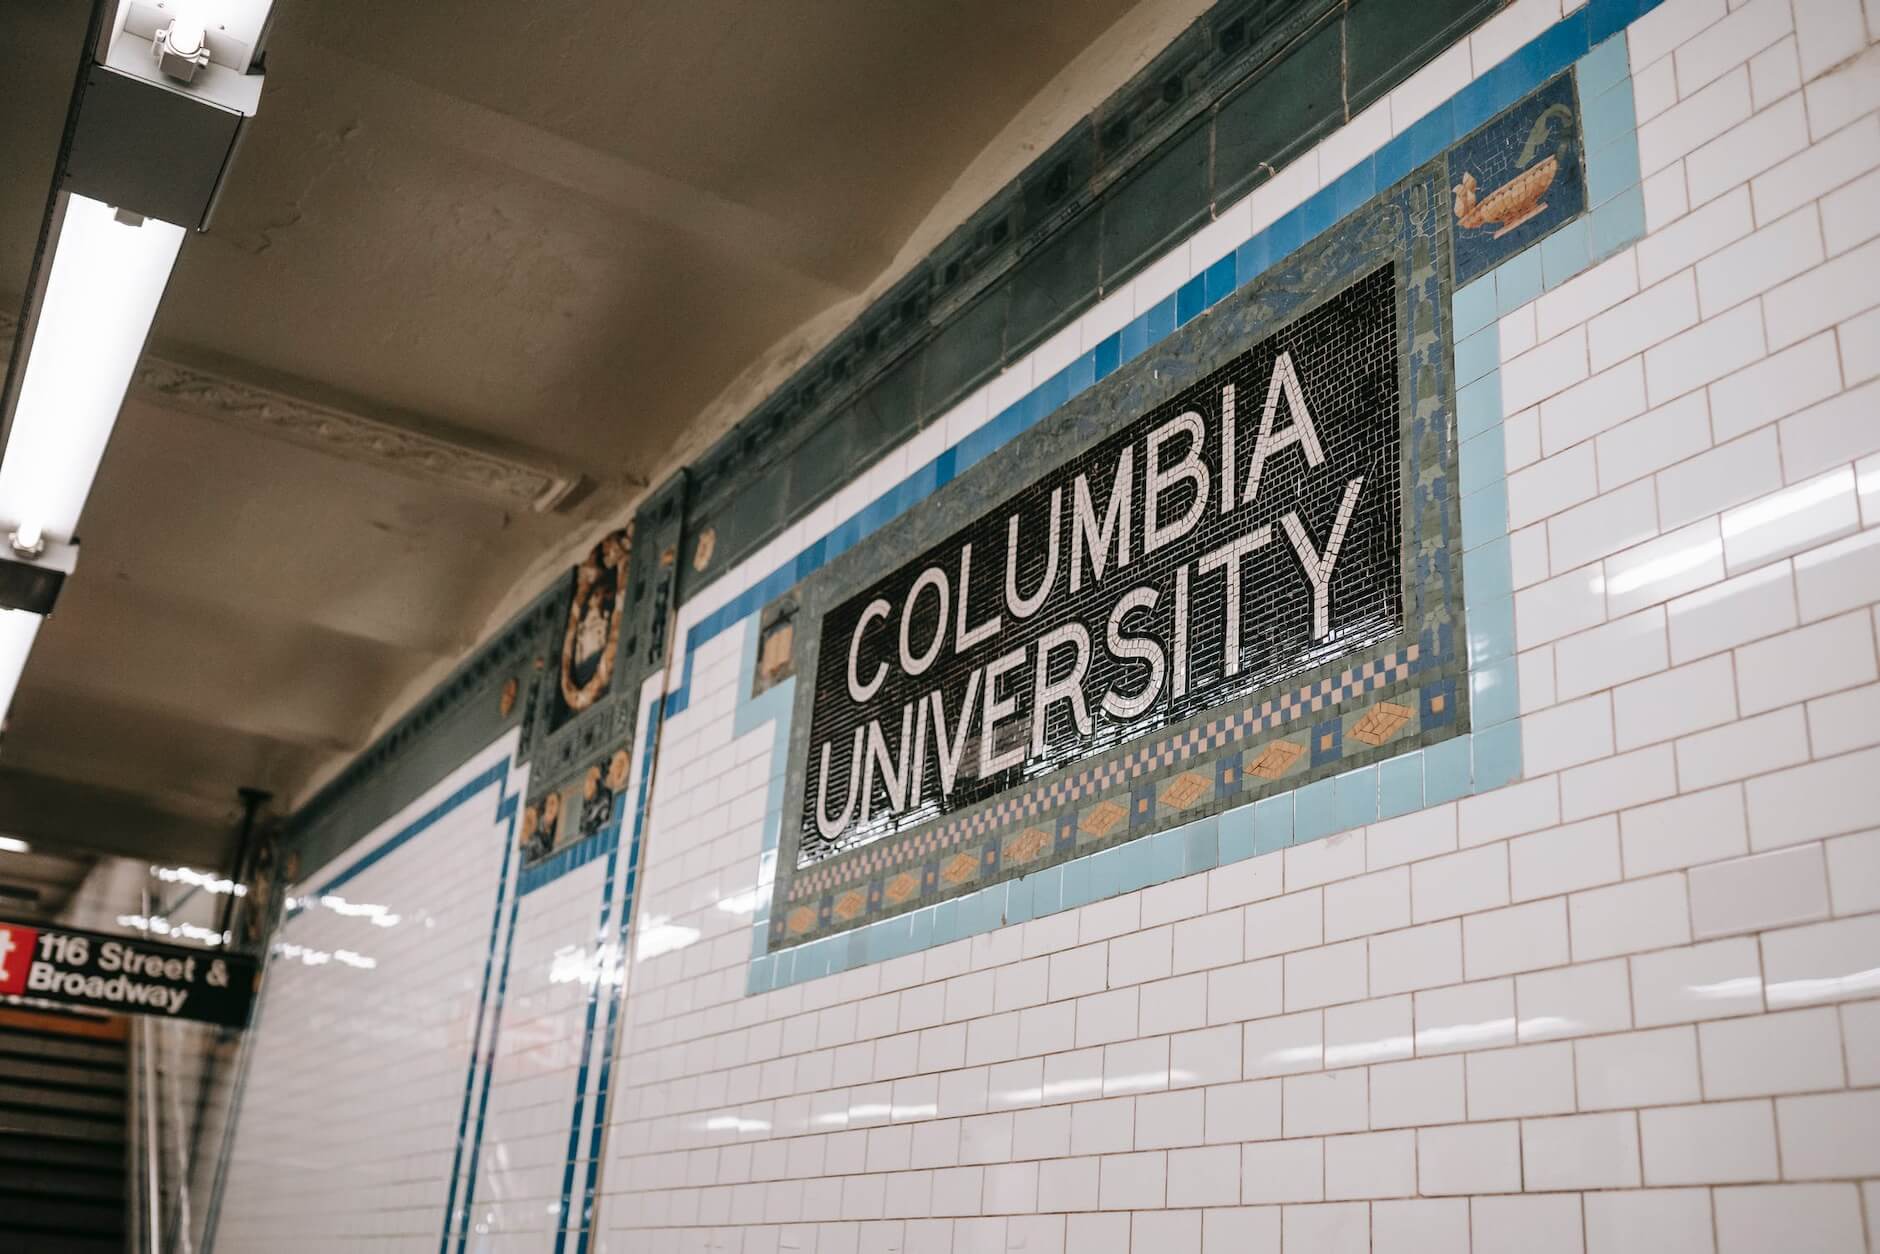 An inscription of Columbian Uni in the NYC metro